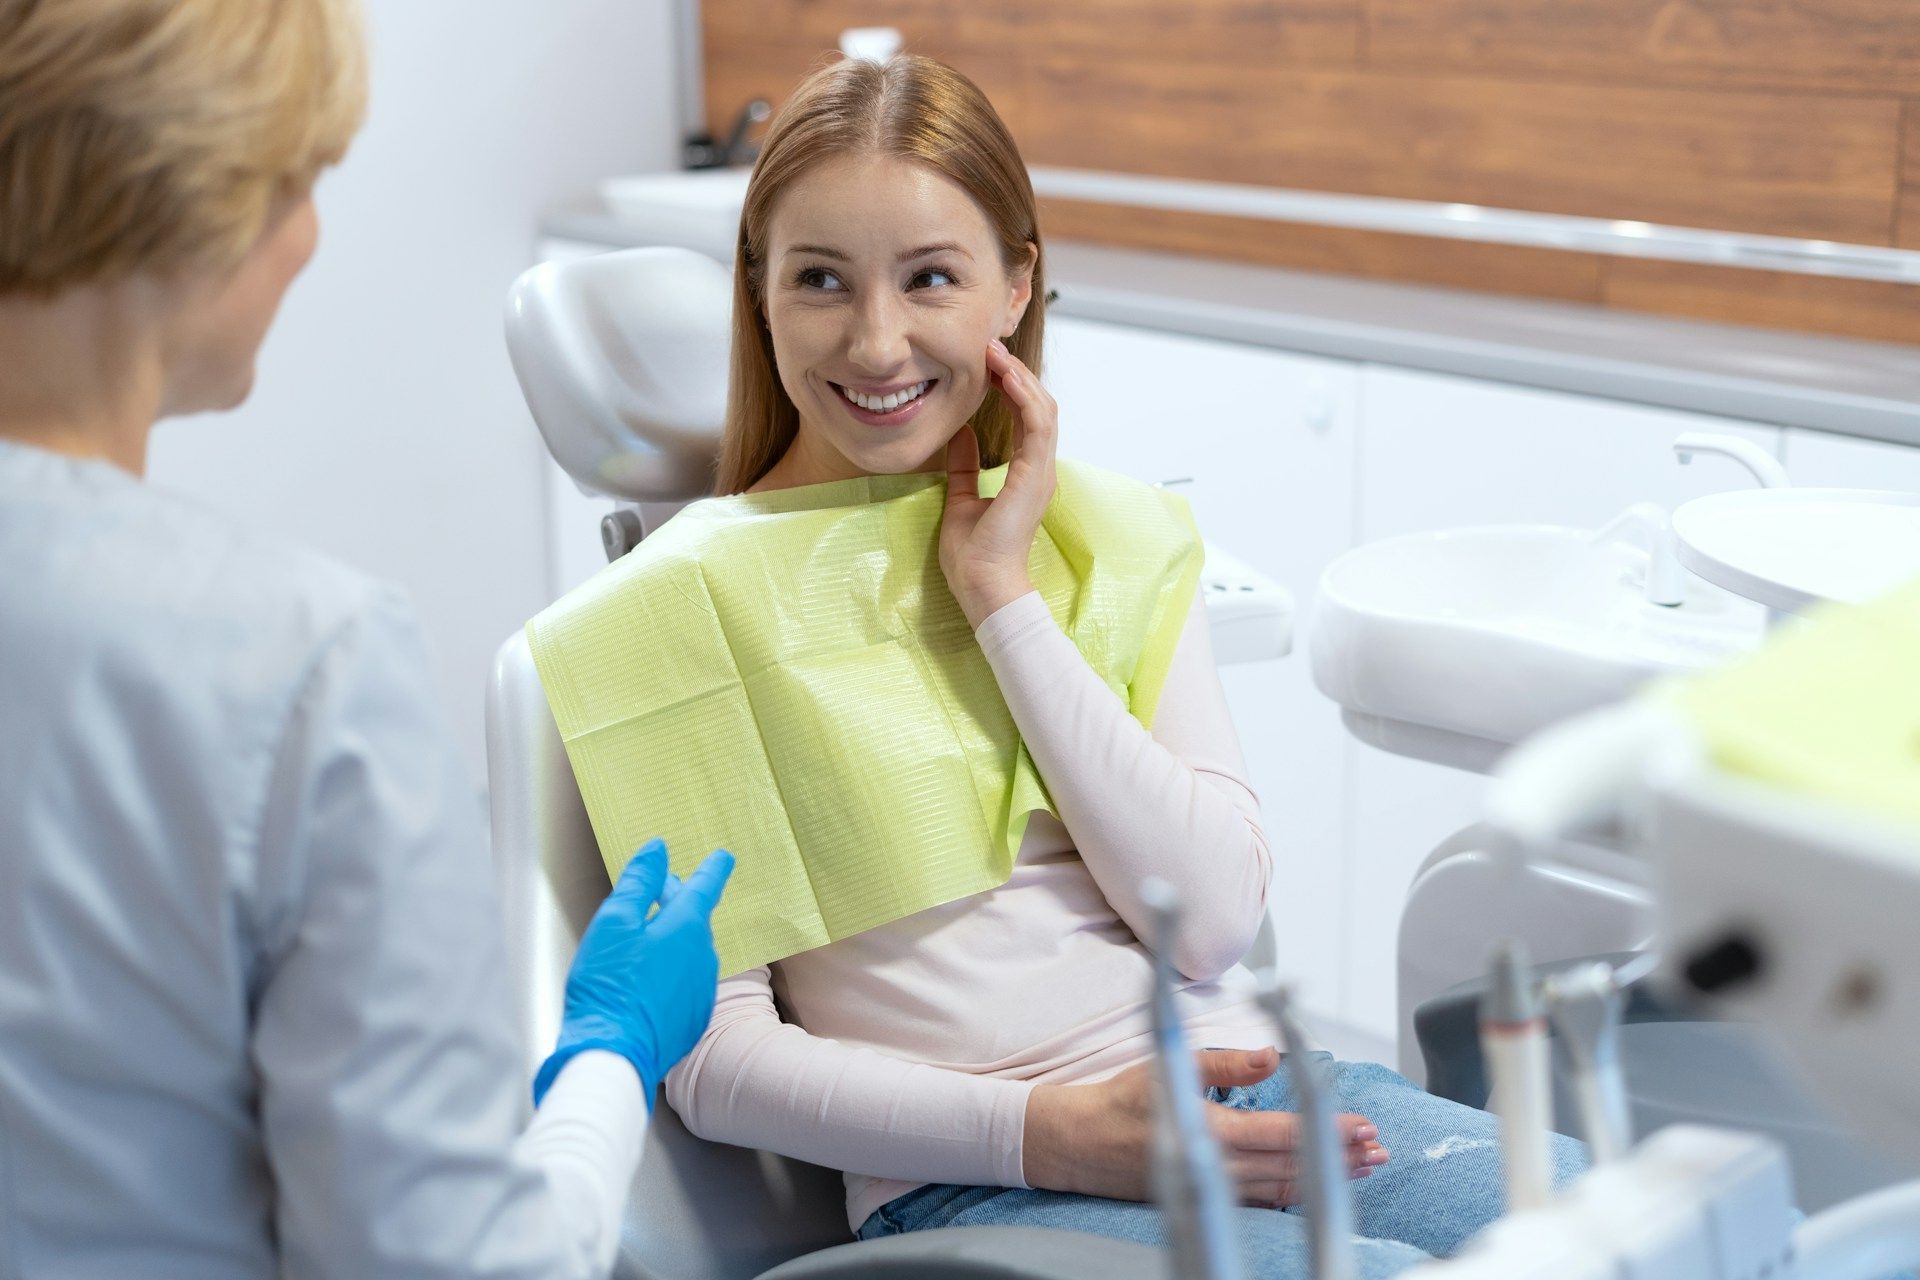 A woman is sitting in a dental chair talking to a dentist.